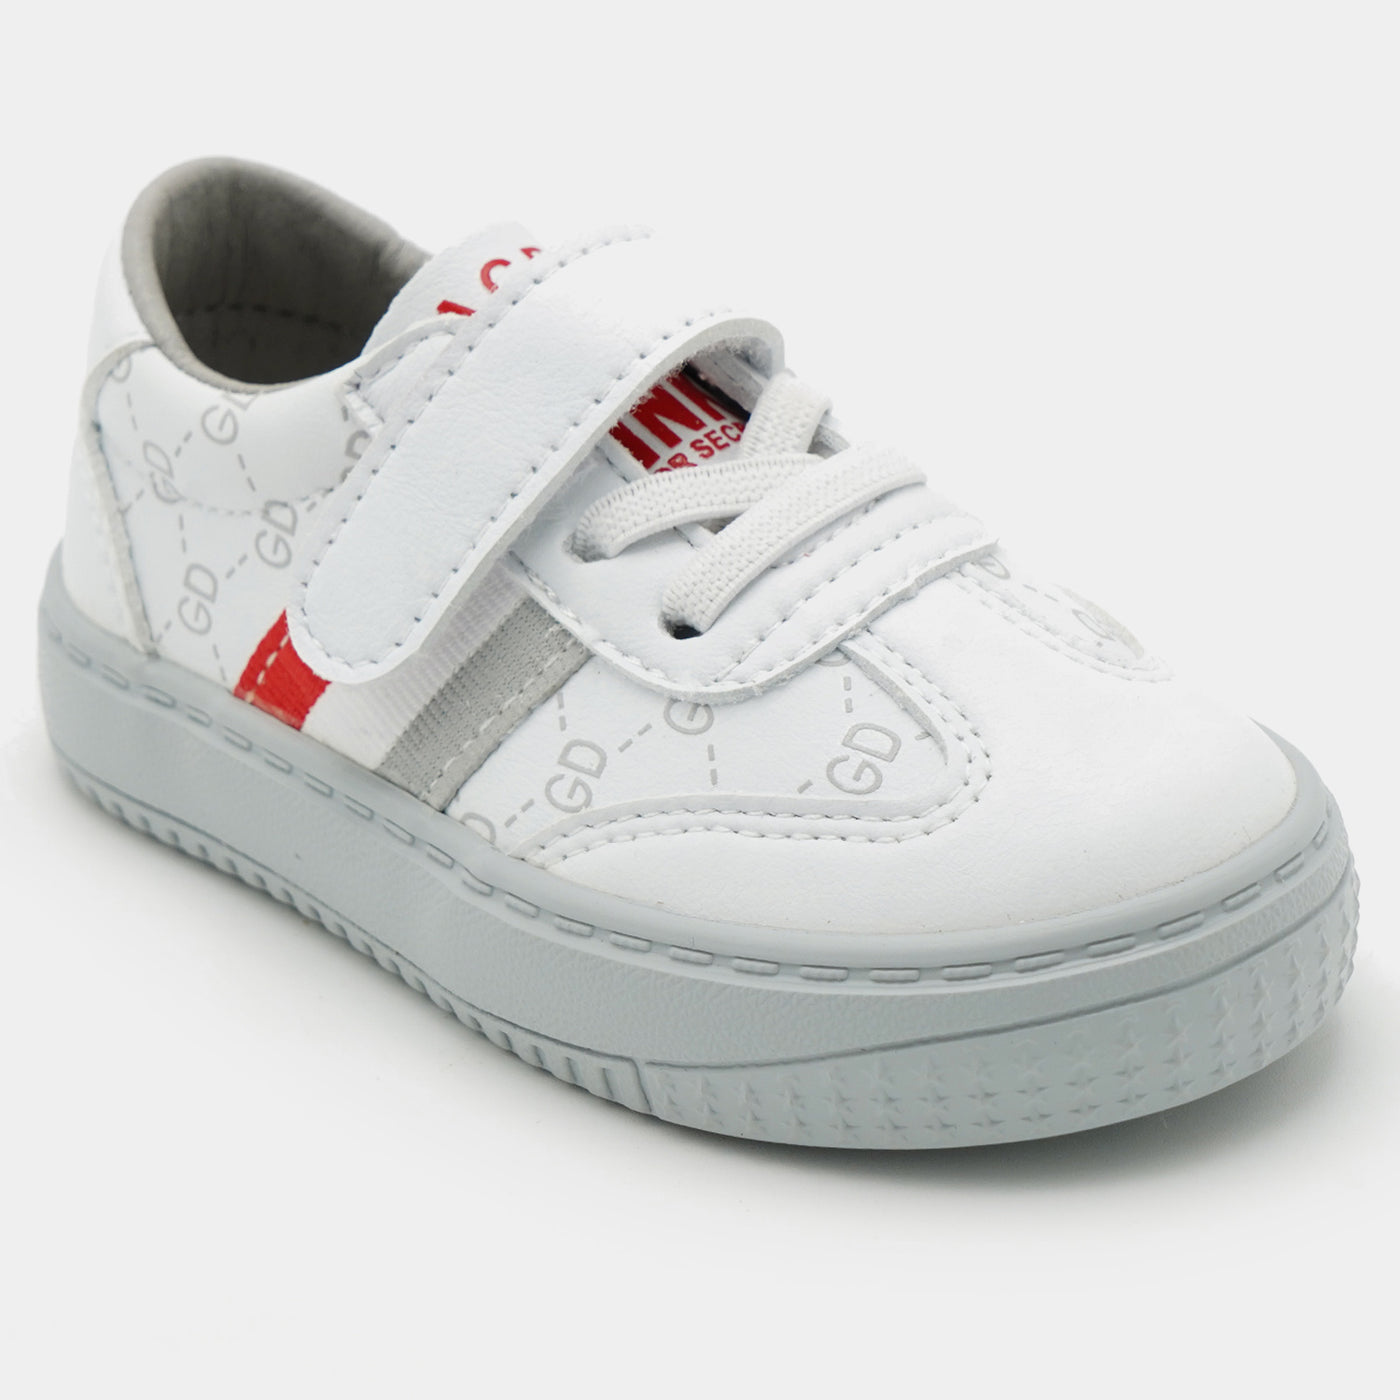 Girls Sneakers 2288C-White/Red